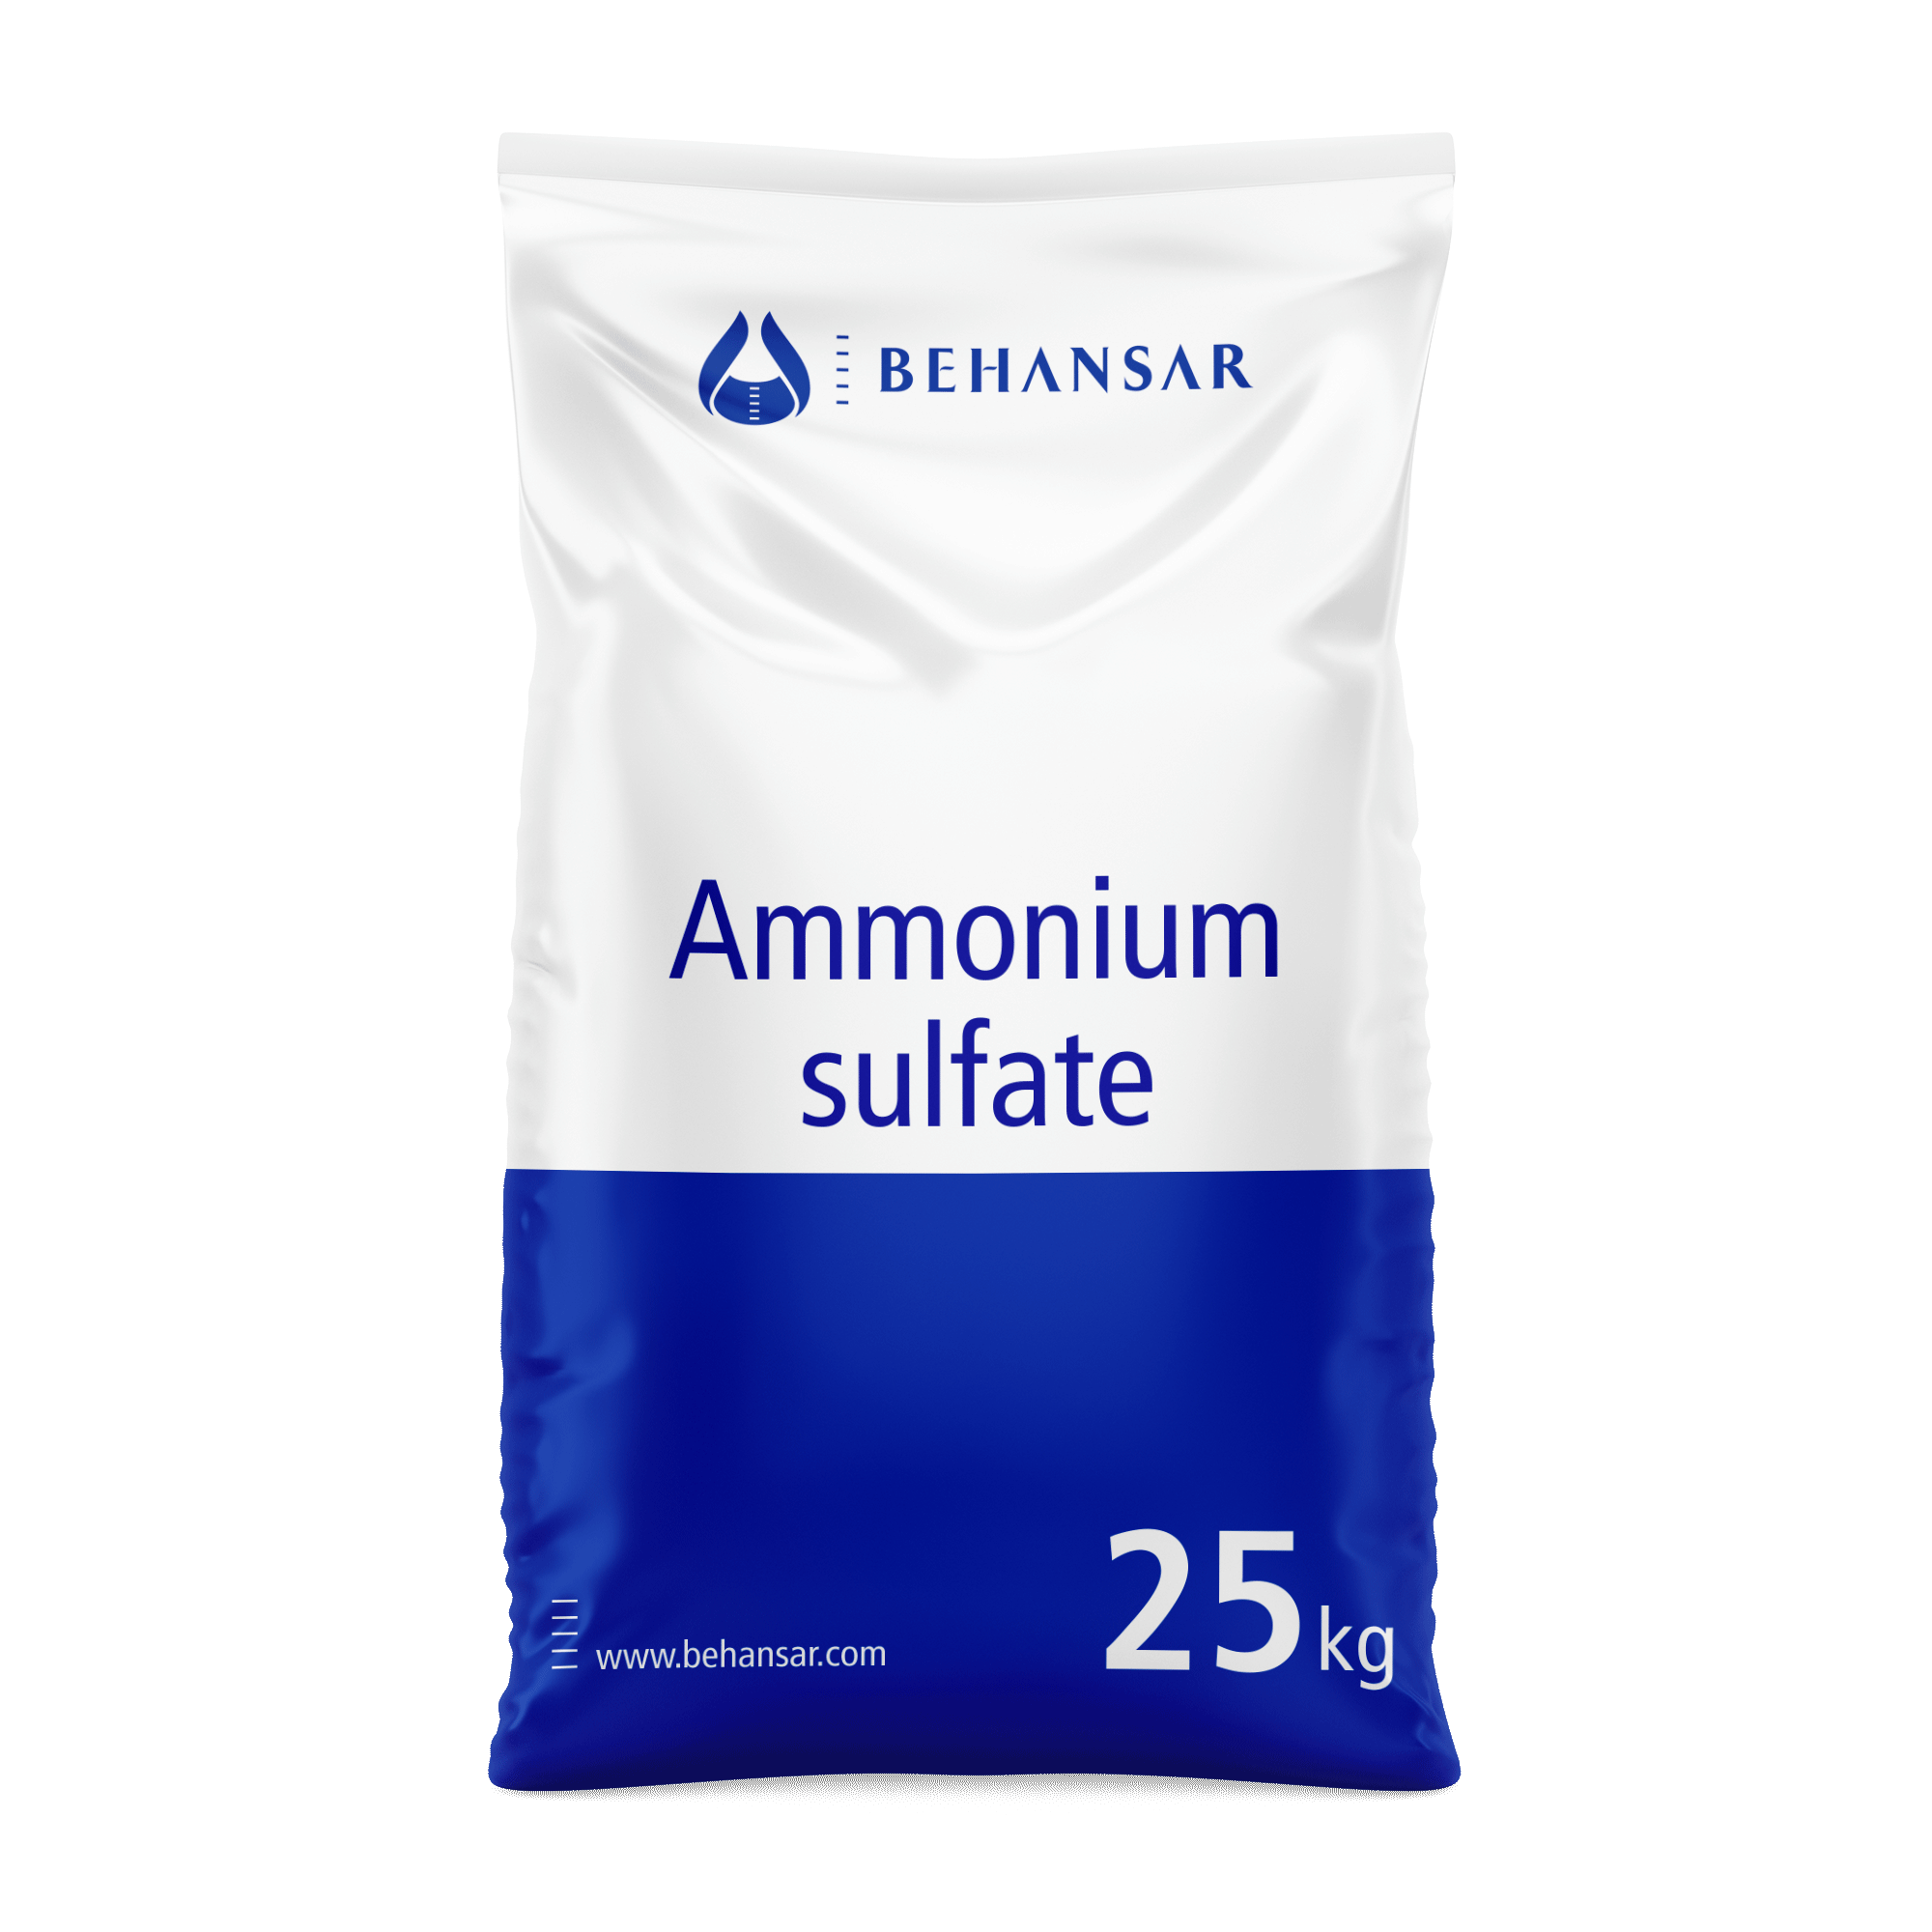 Ammonium sulfate is one of the products of Behansar Co